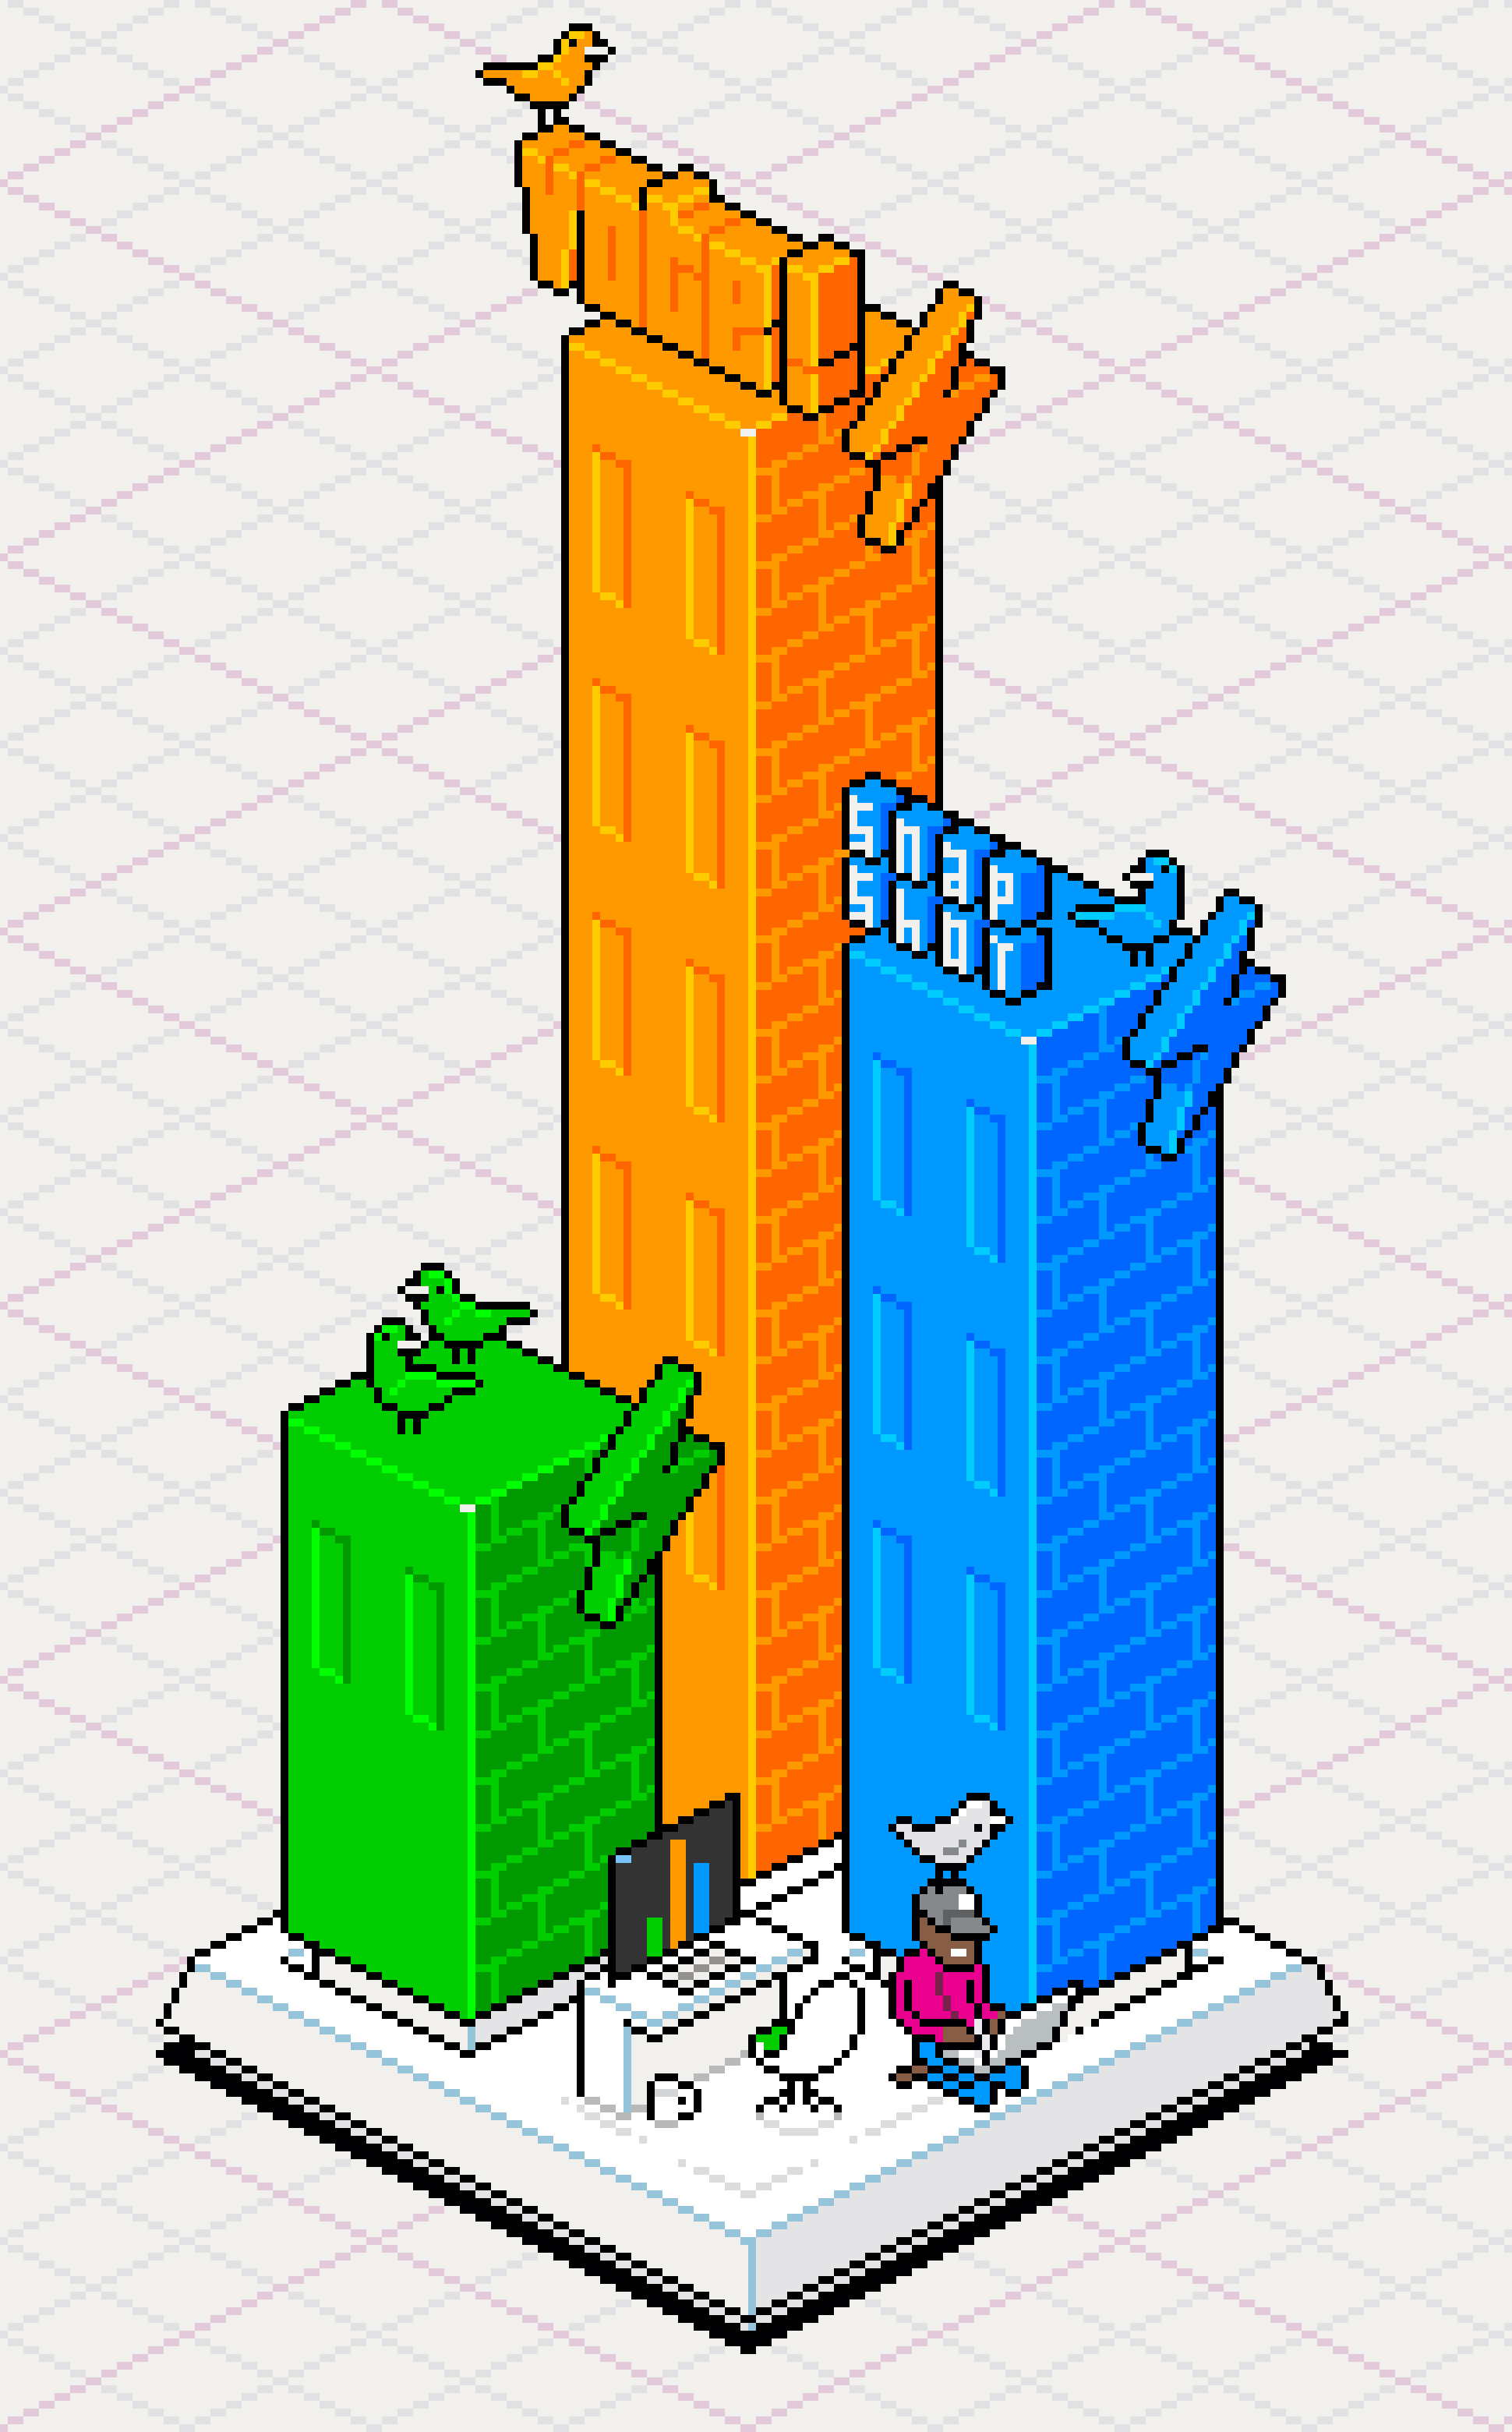 Snapshot Election Tower